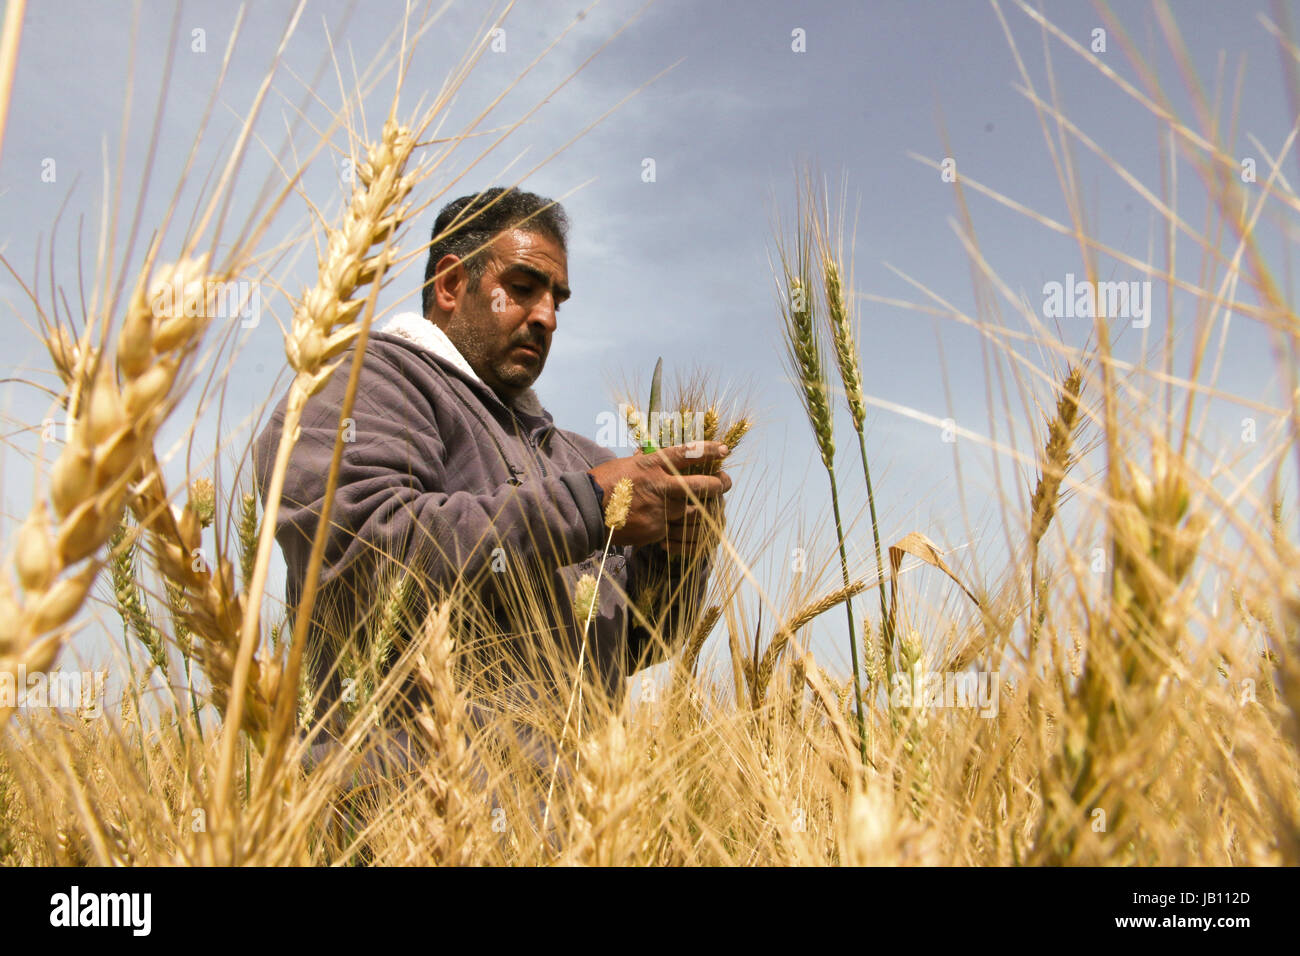 A farmer from the southern Gaza Strip town of Rafah collects wheat for sale on the market.photo by Monther Rasheed/Alamy) Stock Photo